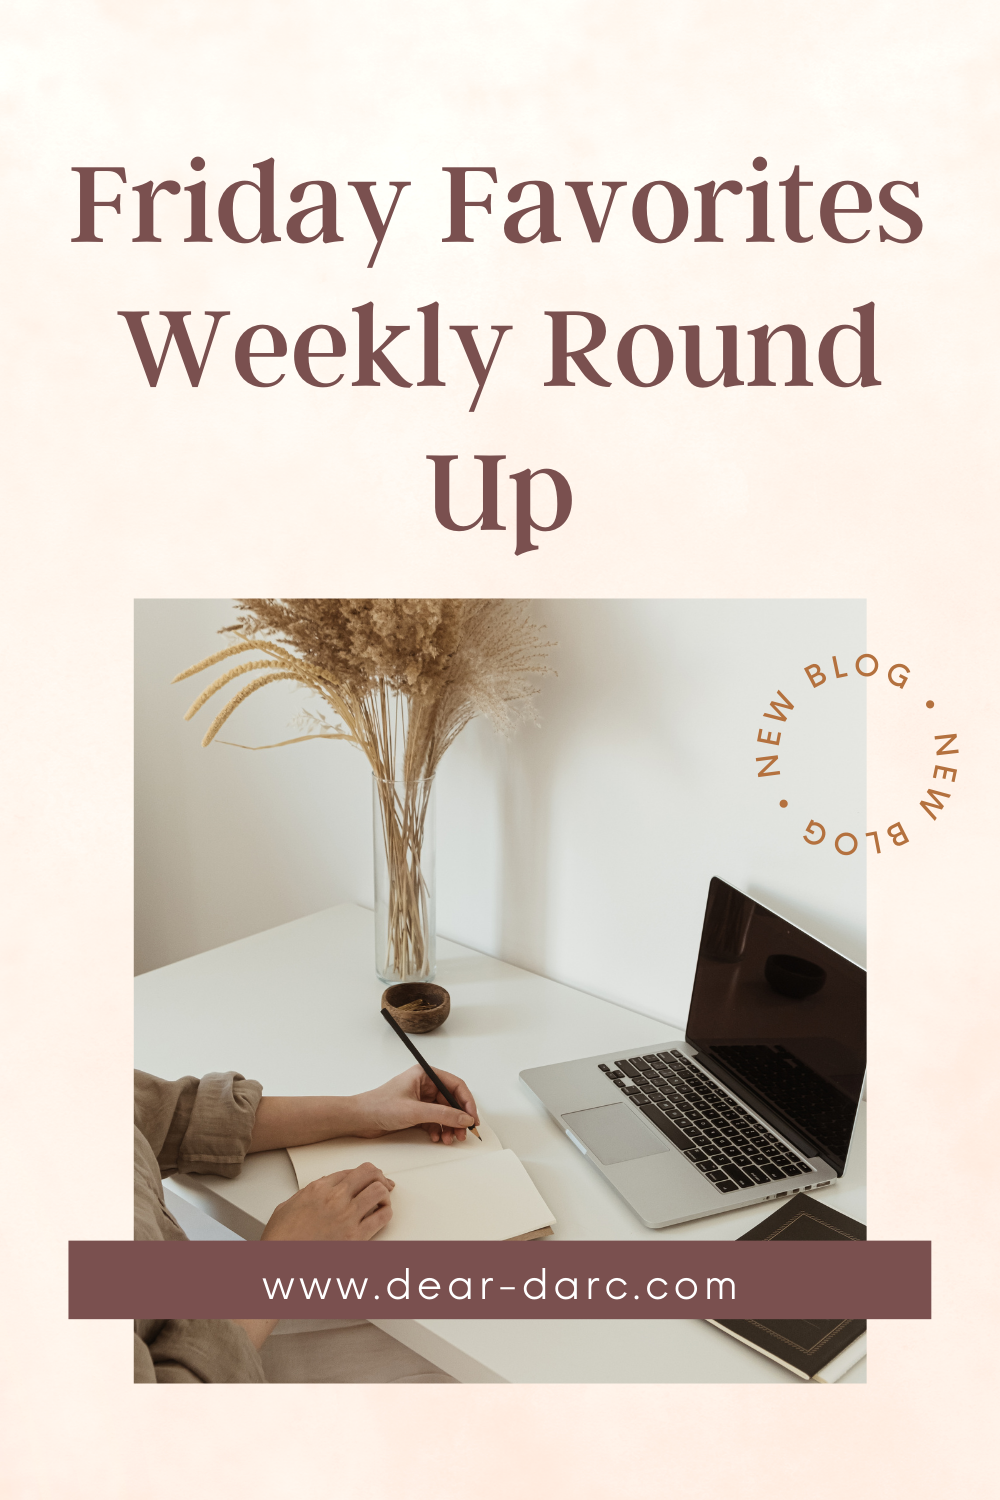 Friday Favorite’s weekly round up